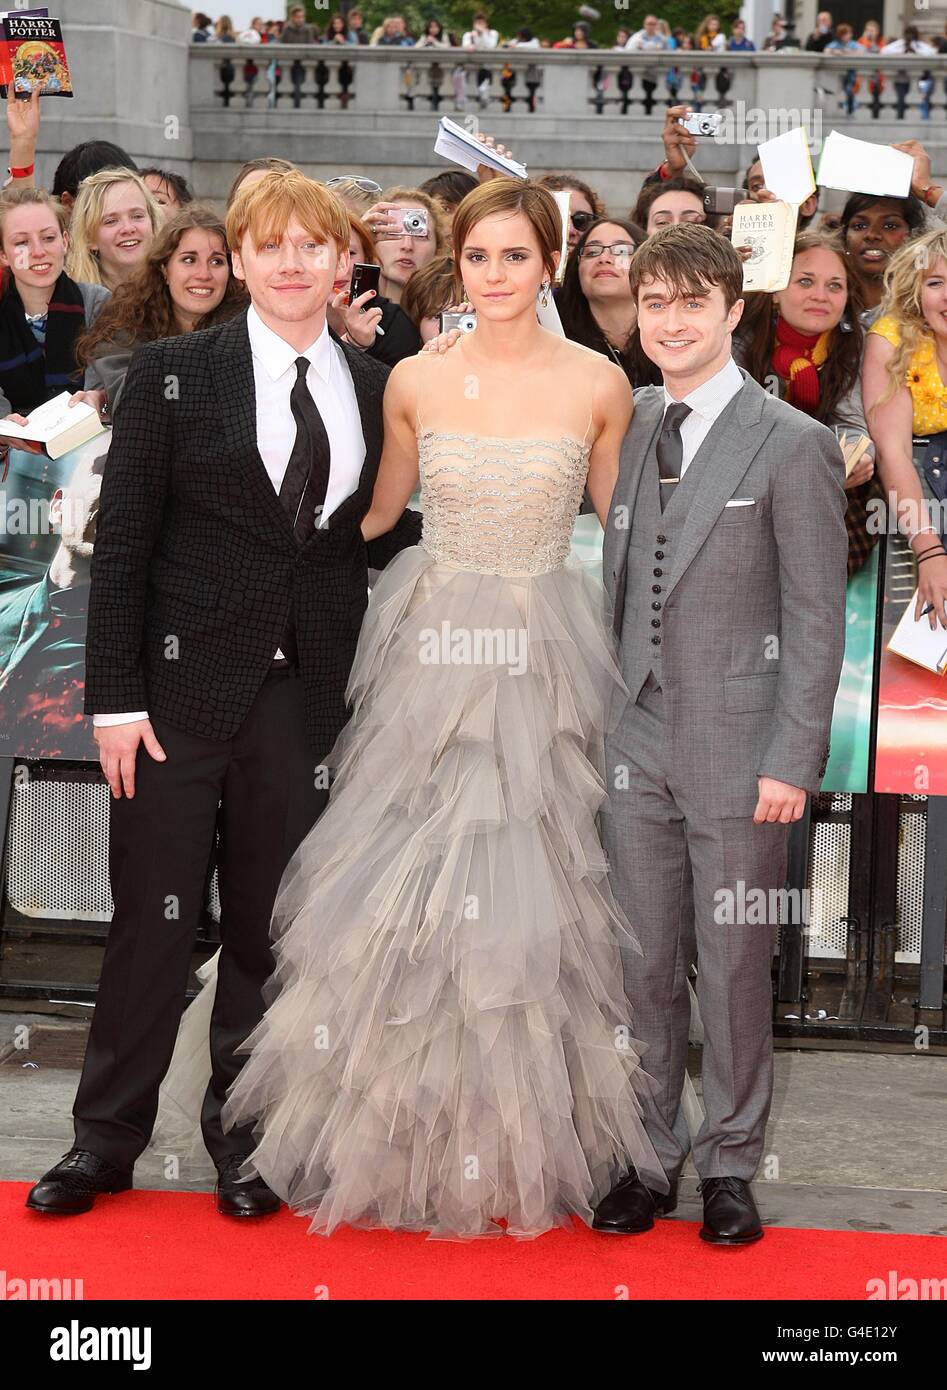 Rupert Grint, Emma Watson and Daniel Radcliffe at the world premiere of Harry Potter And The Deathly Hallows: Part 2. Stock Photo